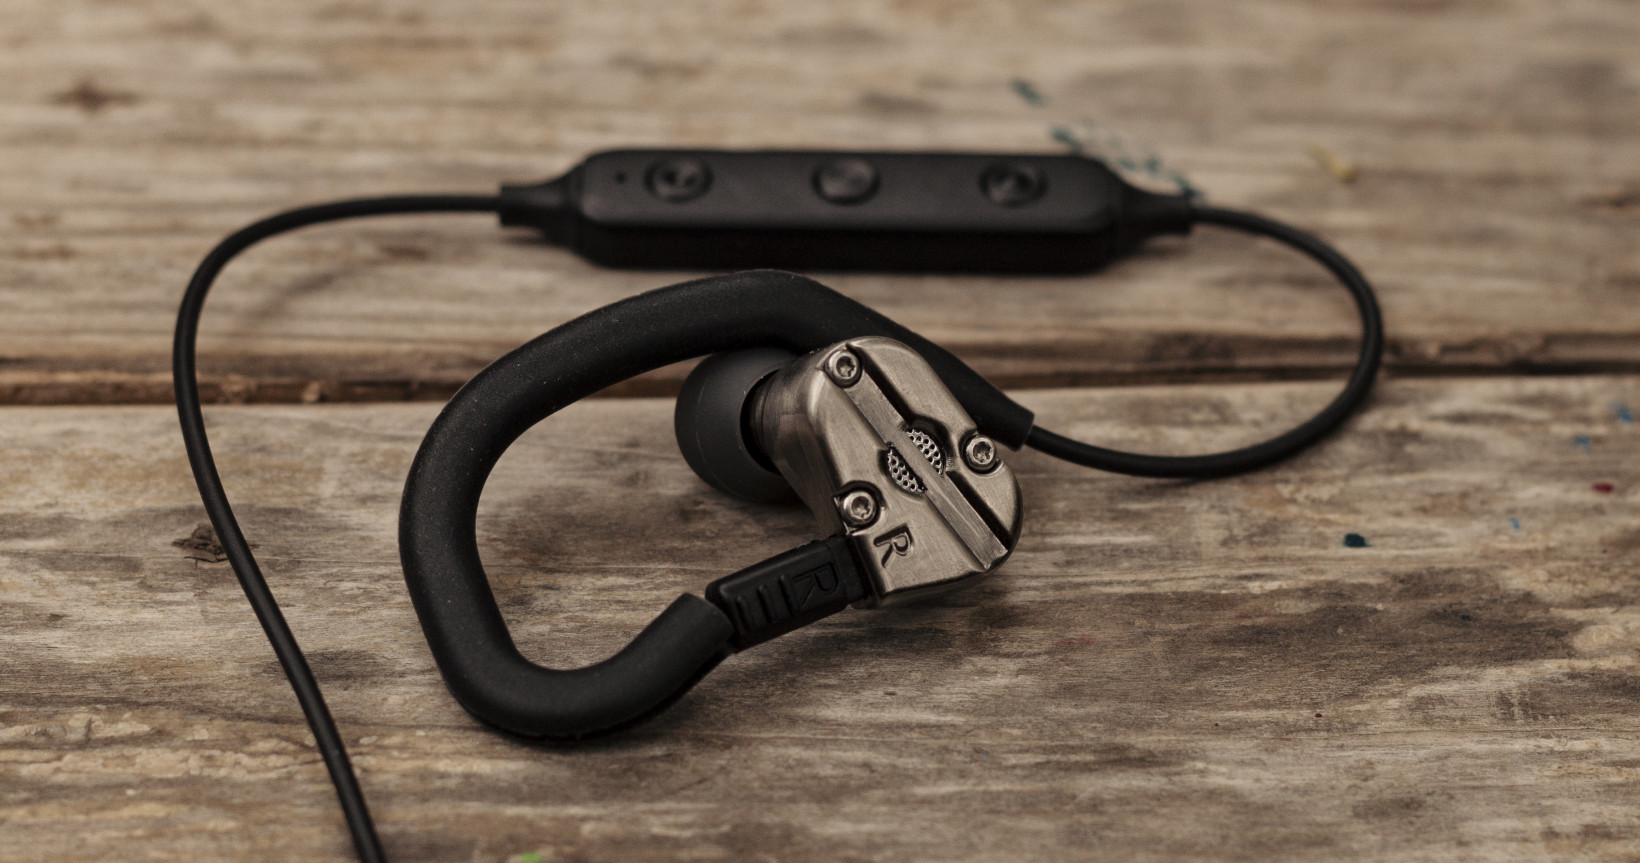 The RevoNext QT5's earpieces can be detached from their main cable and plugged into a Bluetooth cable